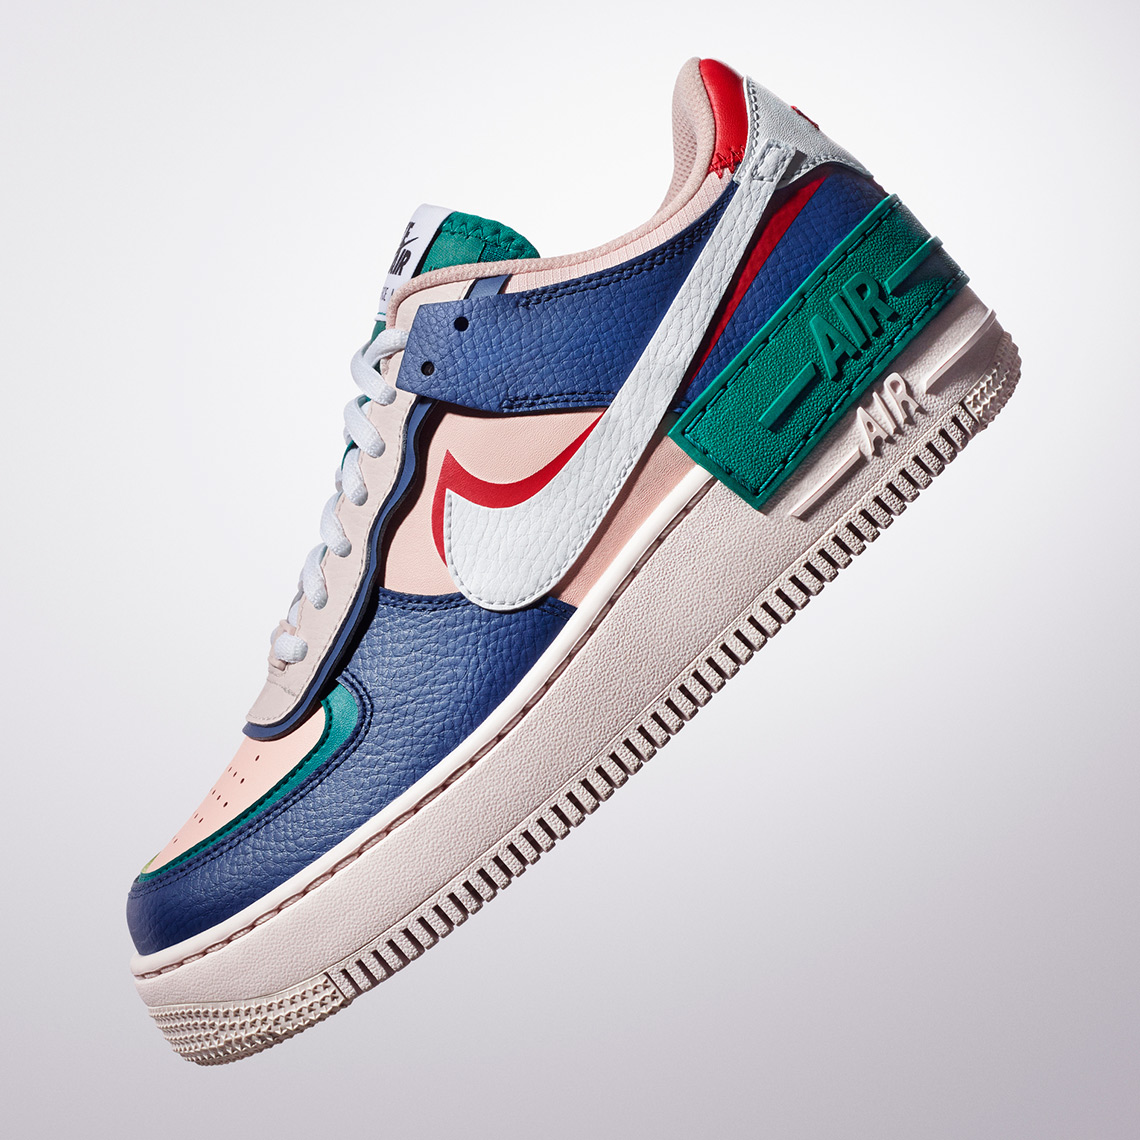 air force 1 new releases 2019